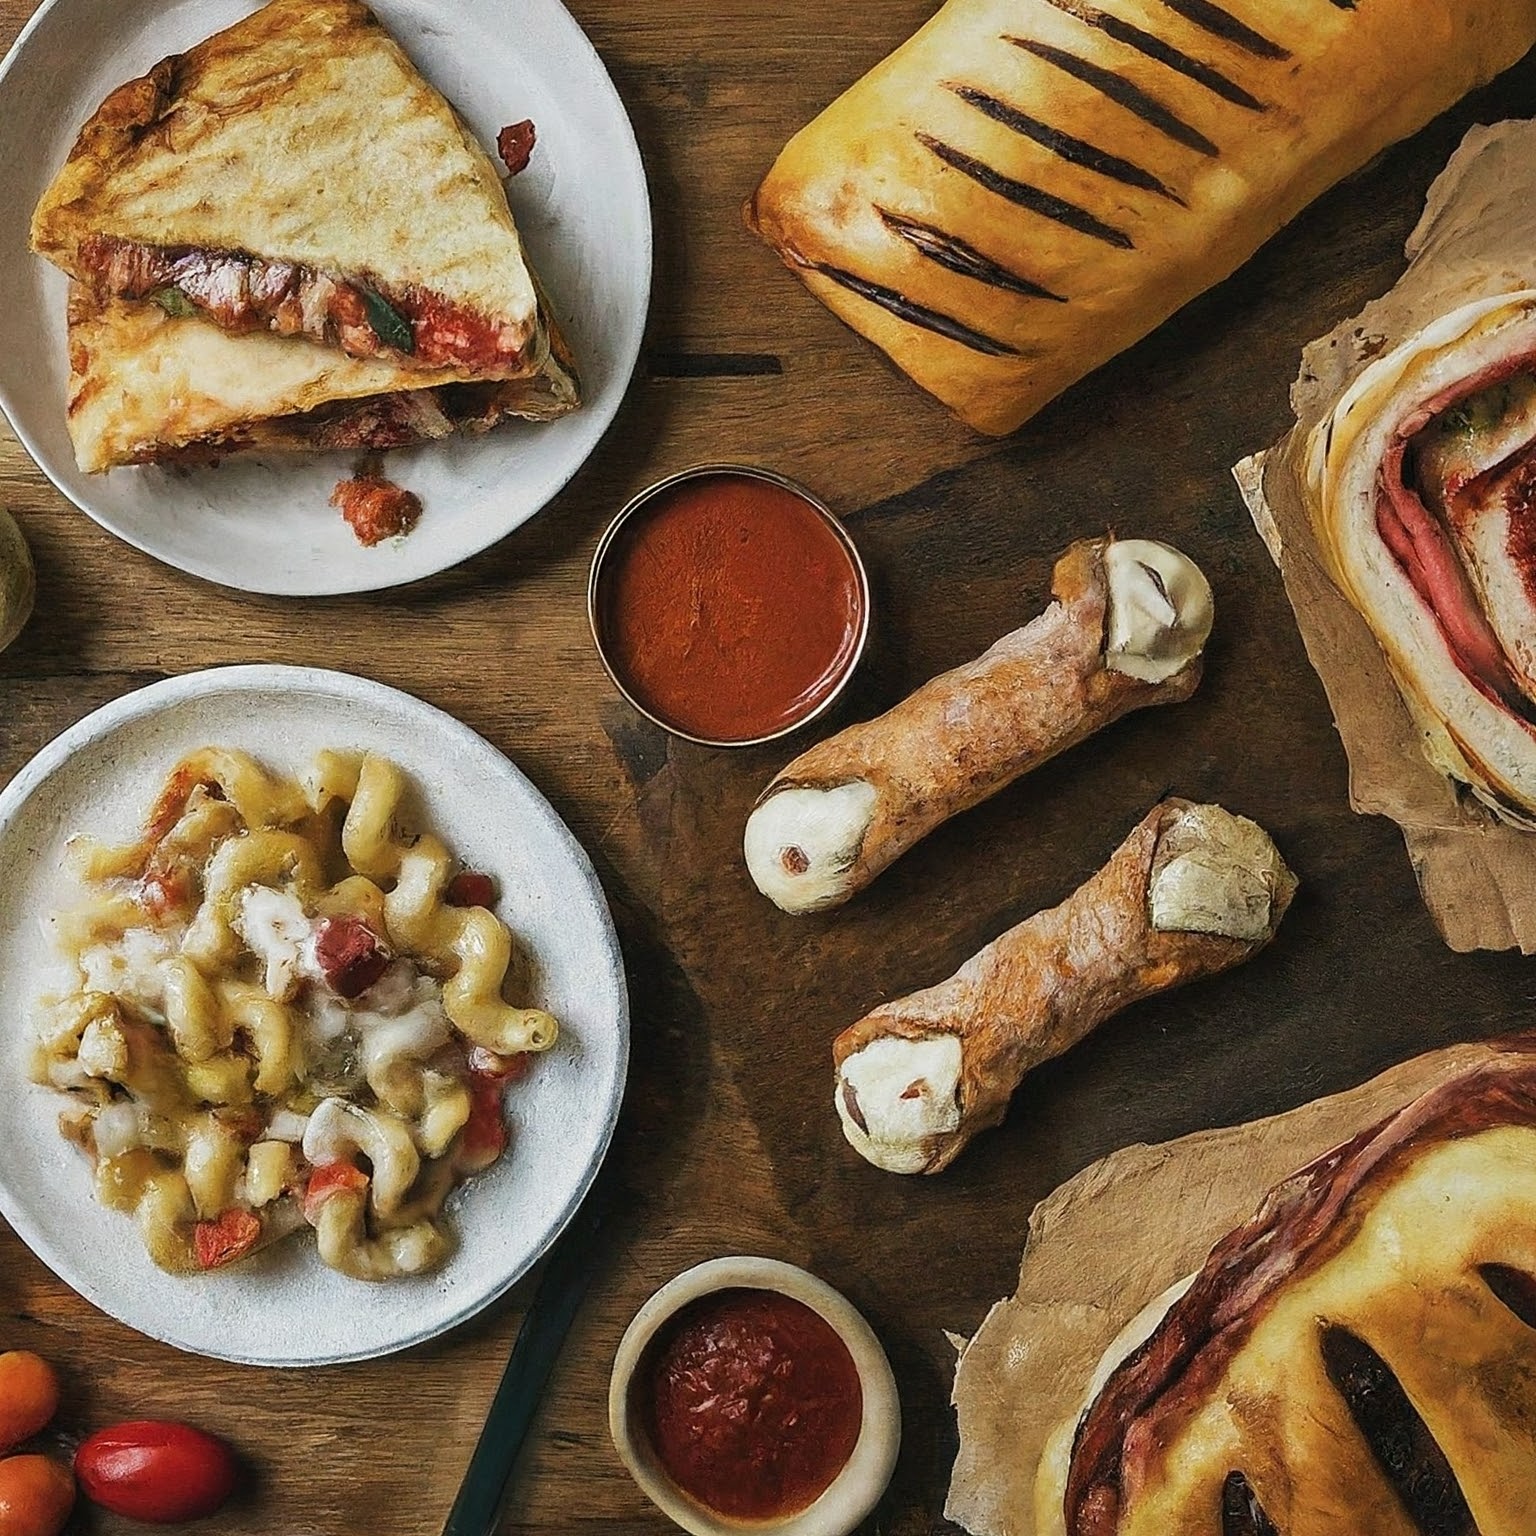 An assortment of meals: sandwiches, a pasta dish, and sauce on a wooden table, surrounded by ingredients like tomatoes.